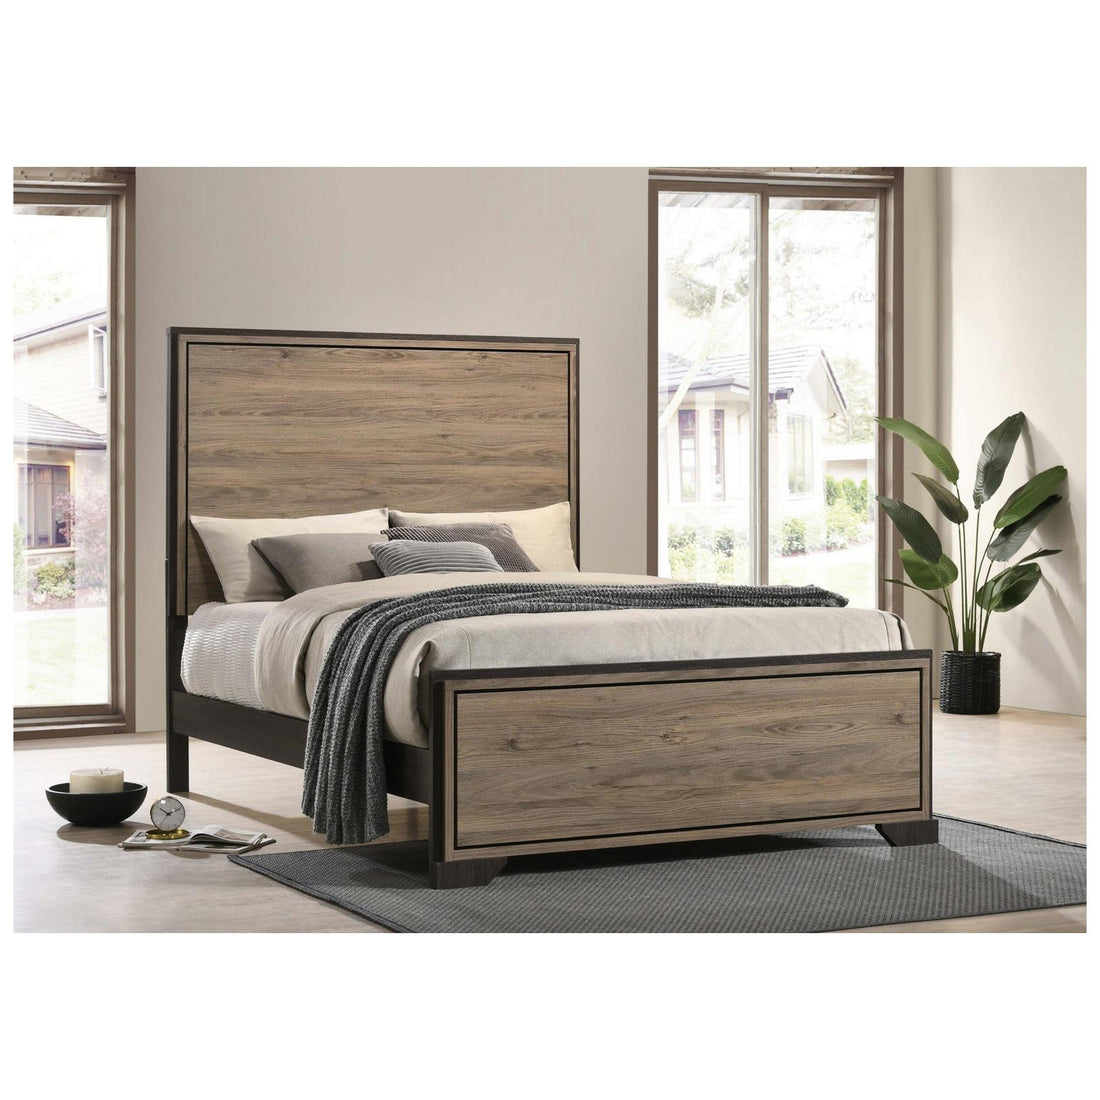 Baker Panel California King Bed Brown and Light Taupe 224461KW